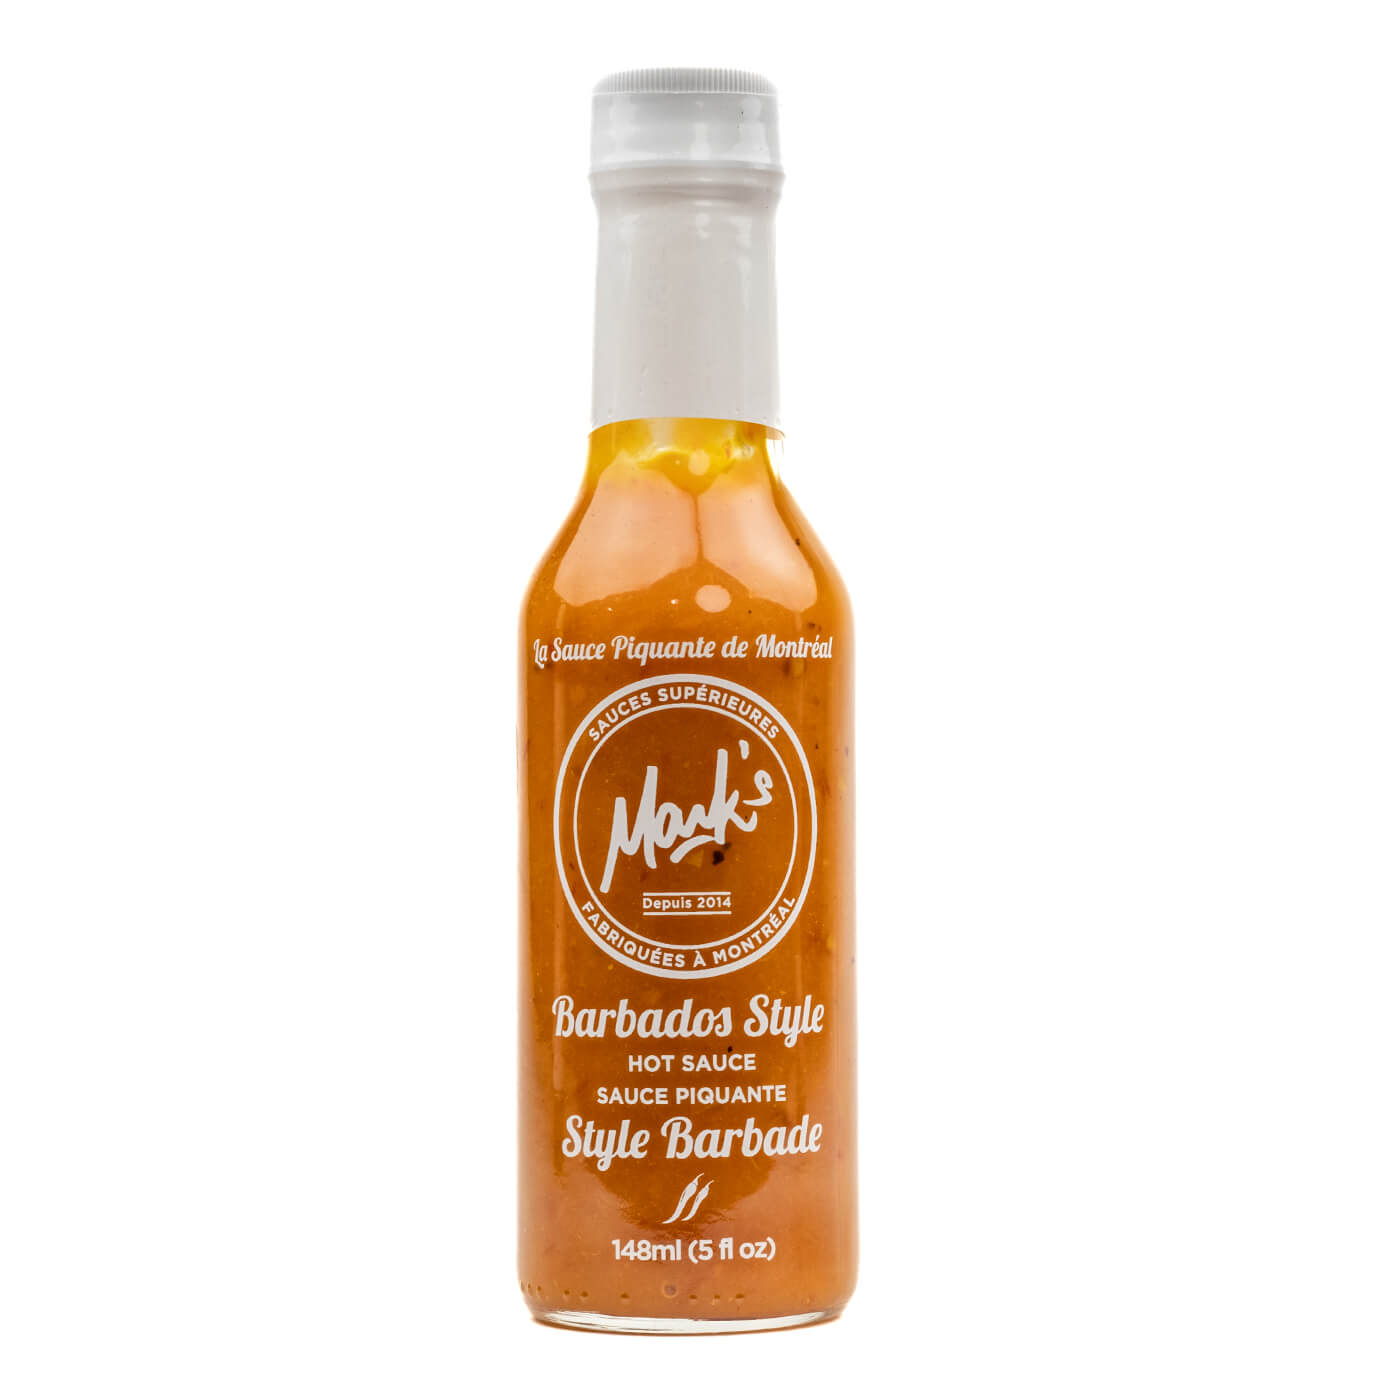 Mark's Barbados style hot sauce